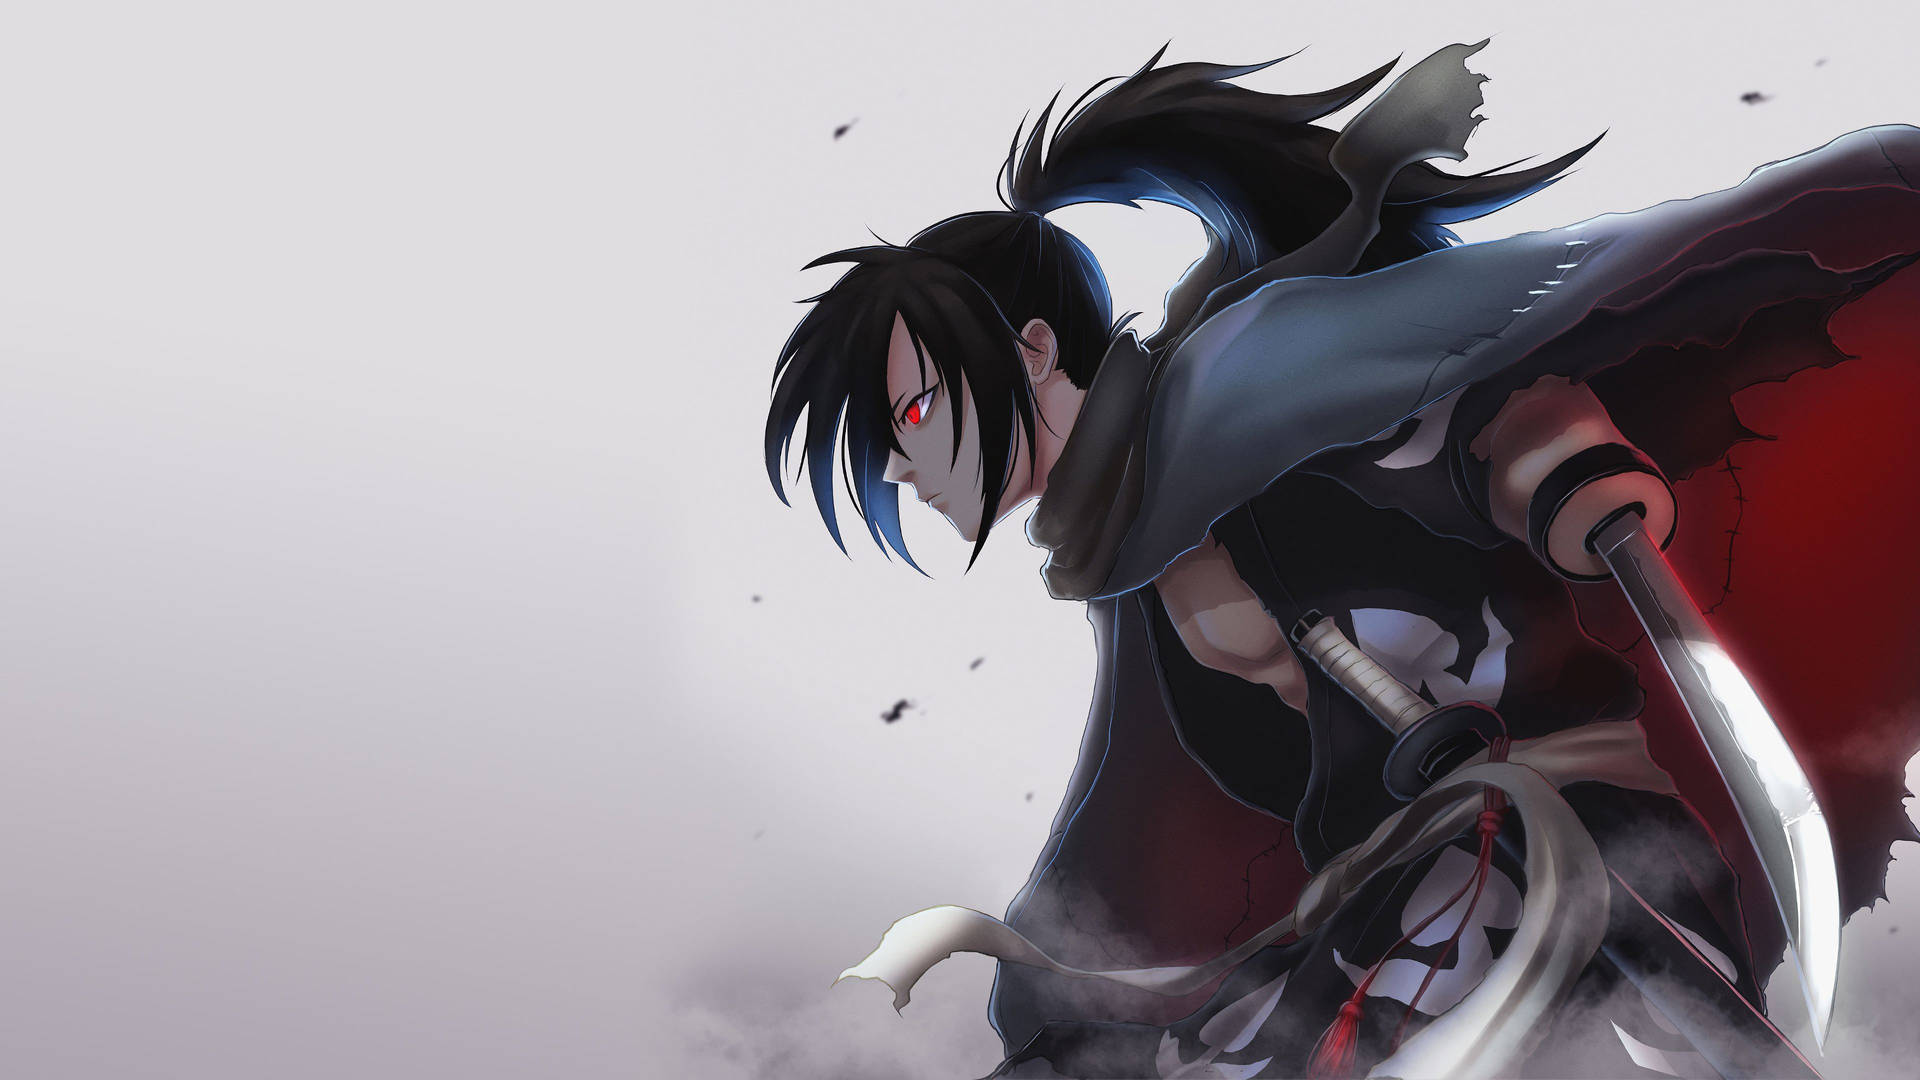 Fearless Hyakkimaru sets out to protect the world from evil in Dororo Wallpaper